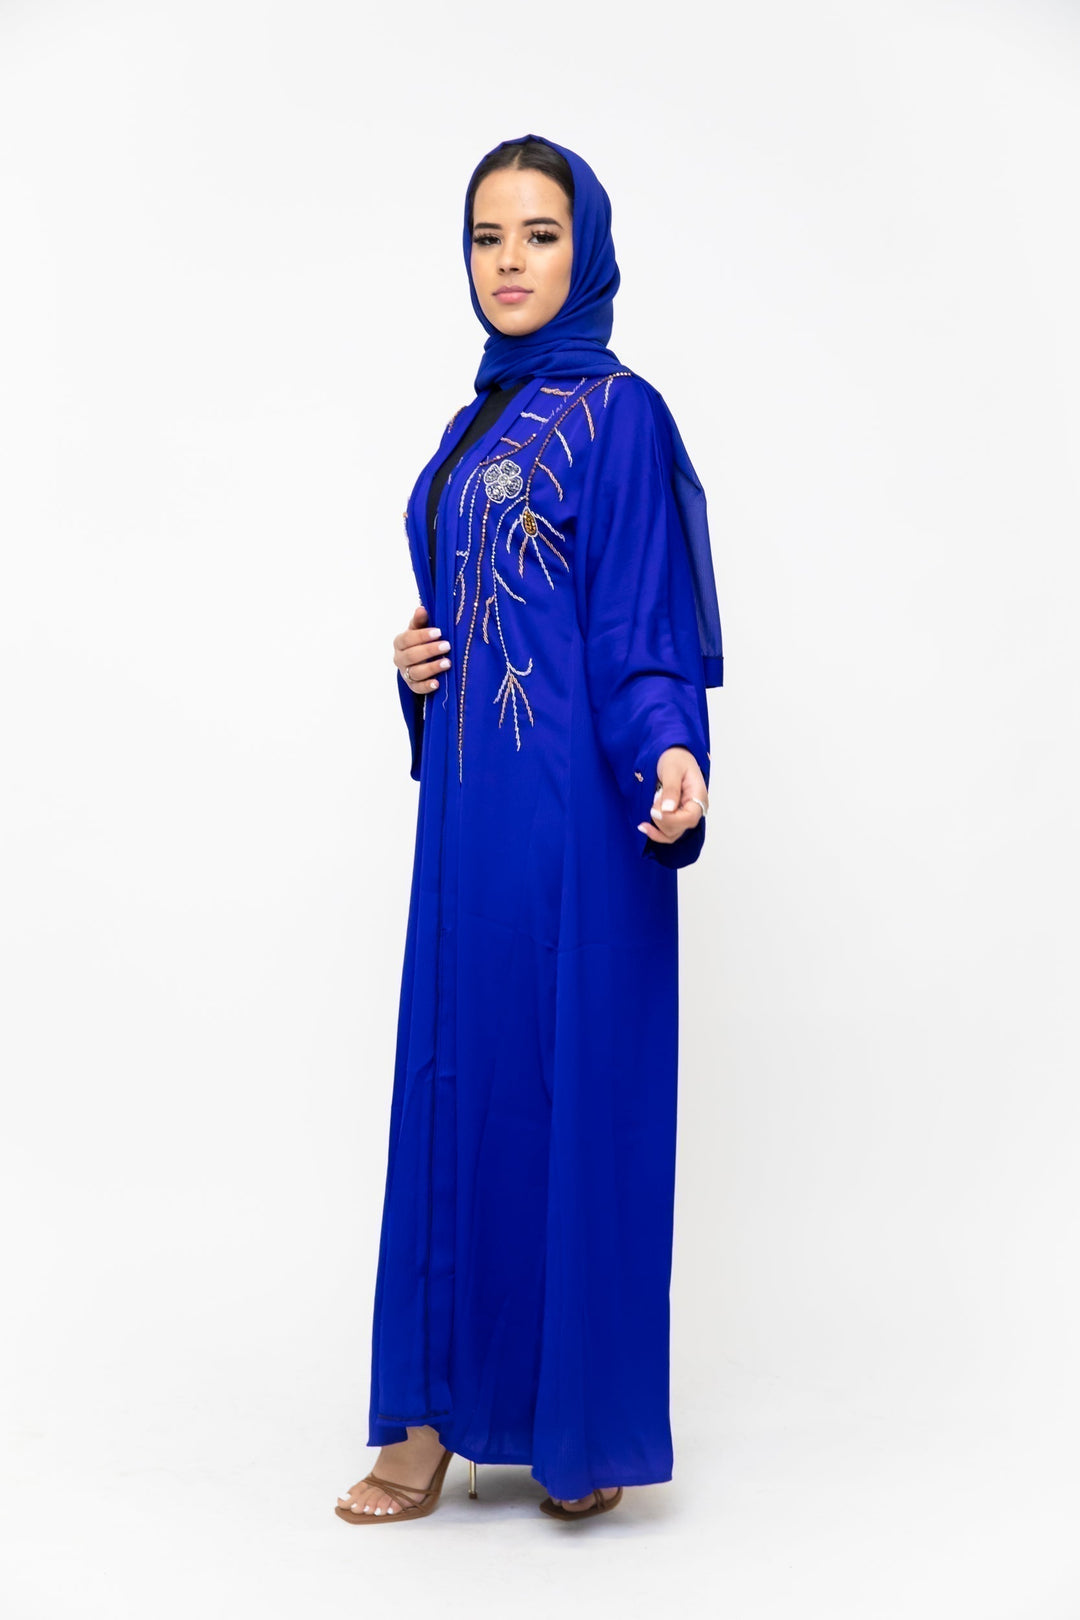 Urban Modesty - Royal Blue Bedazzled Open Front Abaya